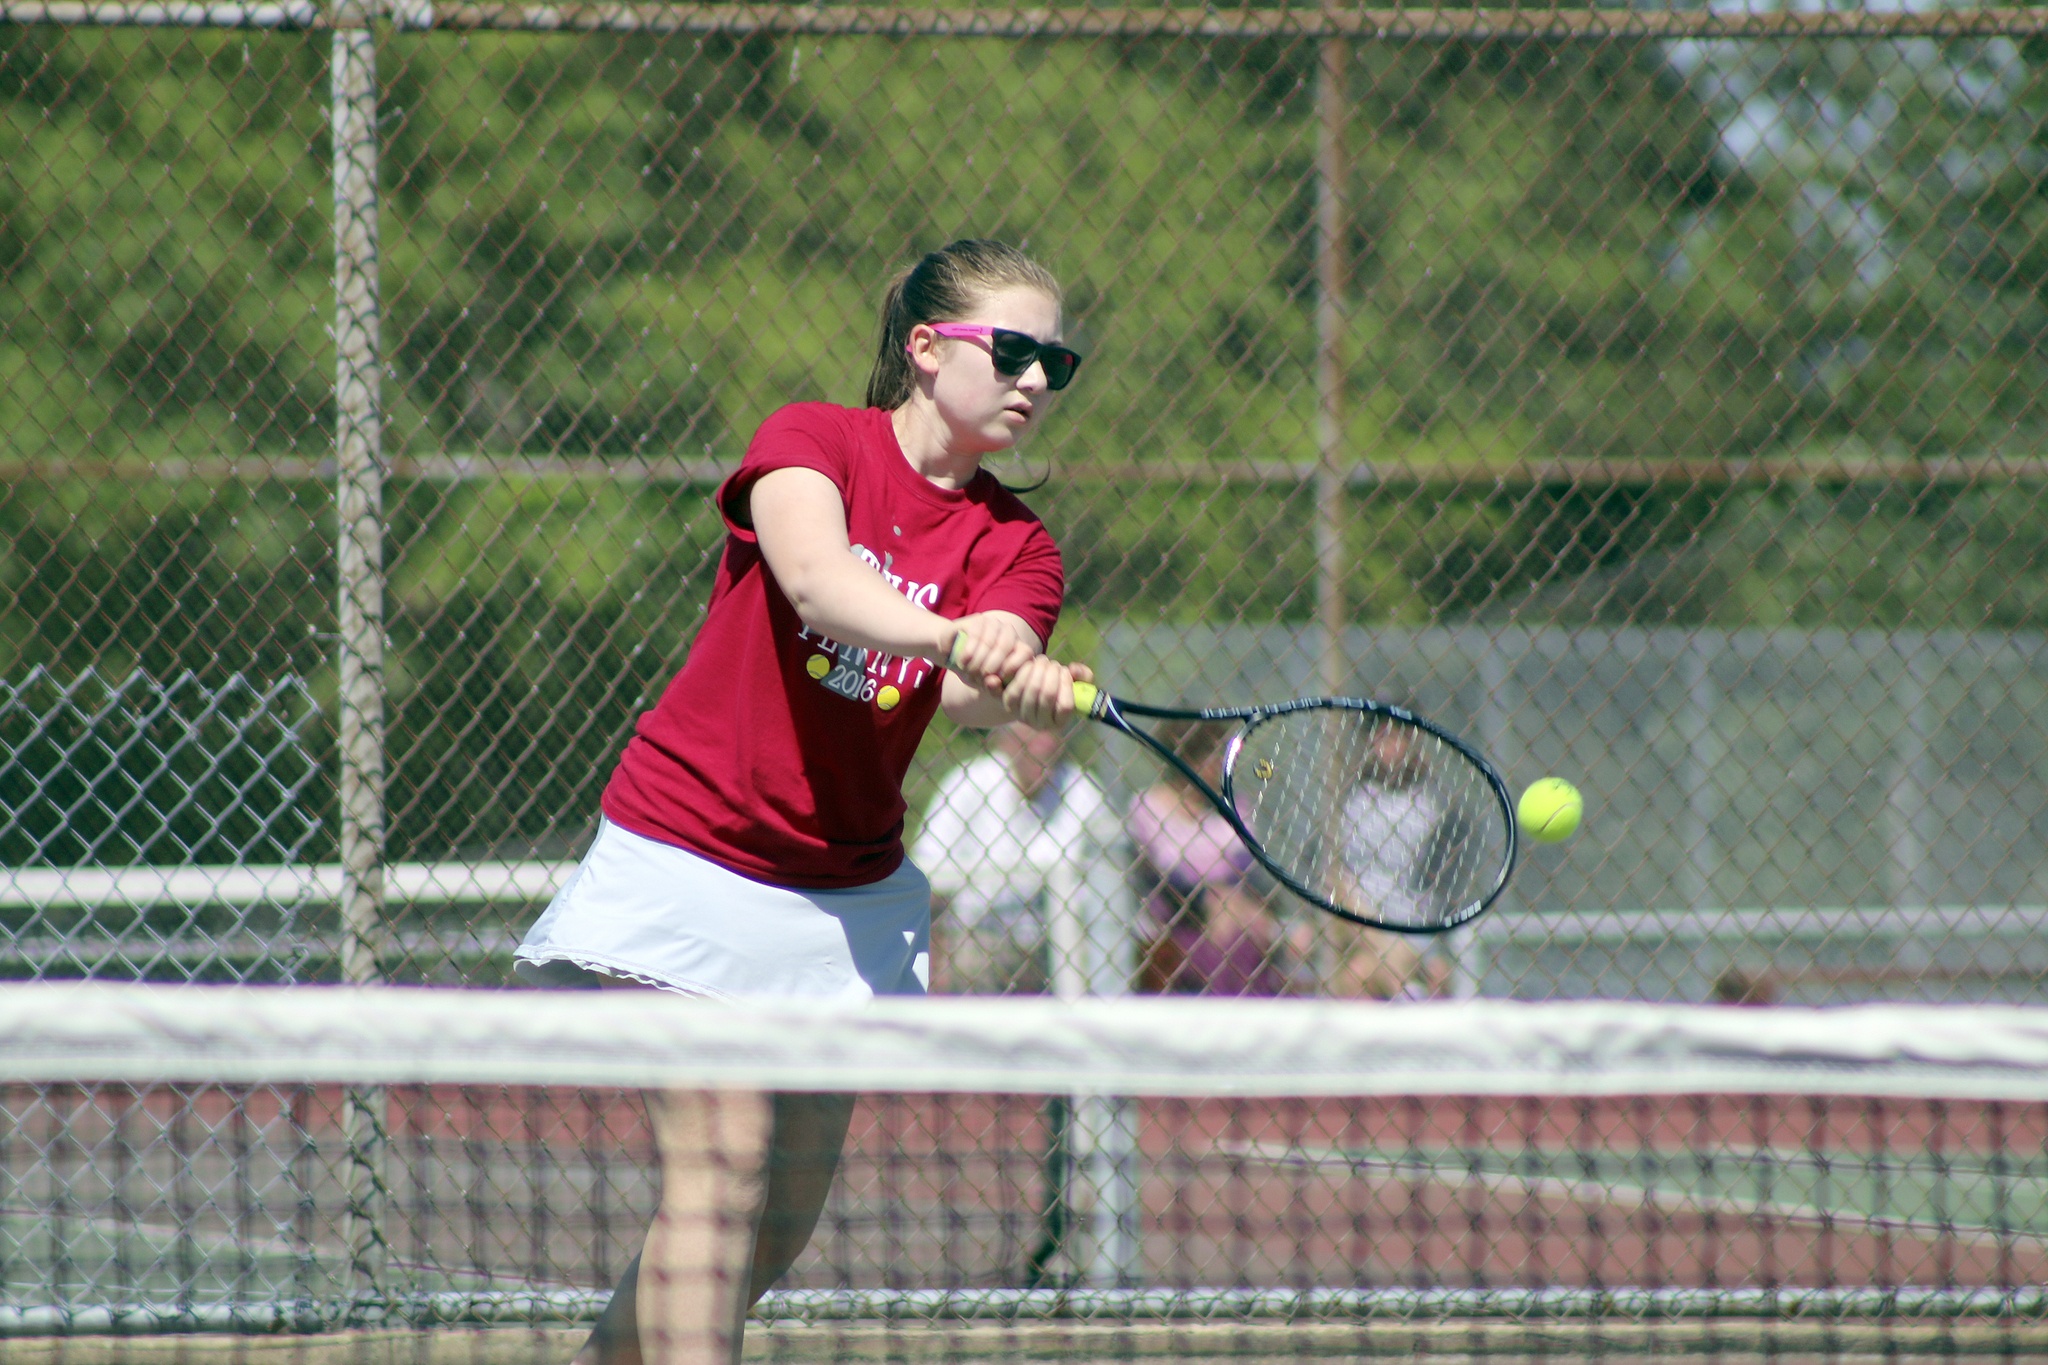 Thomas Jefferson’s Erica Dillard during the South Puget Sound League Central tournament on May 6 at Thomas Jefferson High School. She secured the third seed for the West Central District singles tournament. TERRENCE HILL